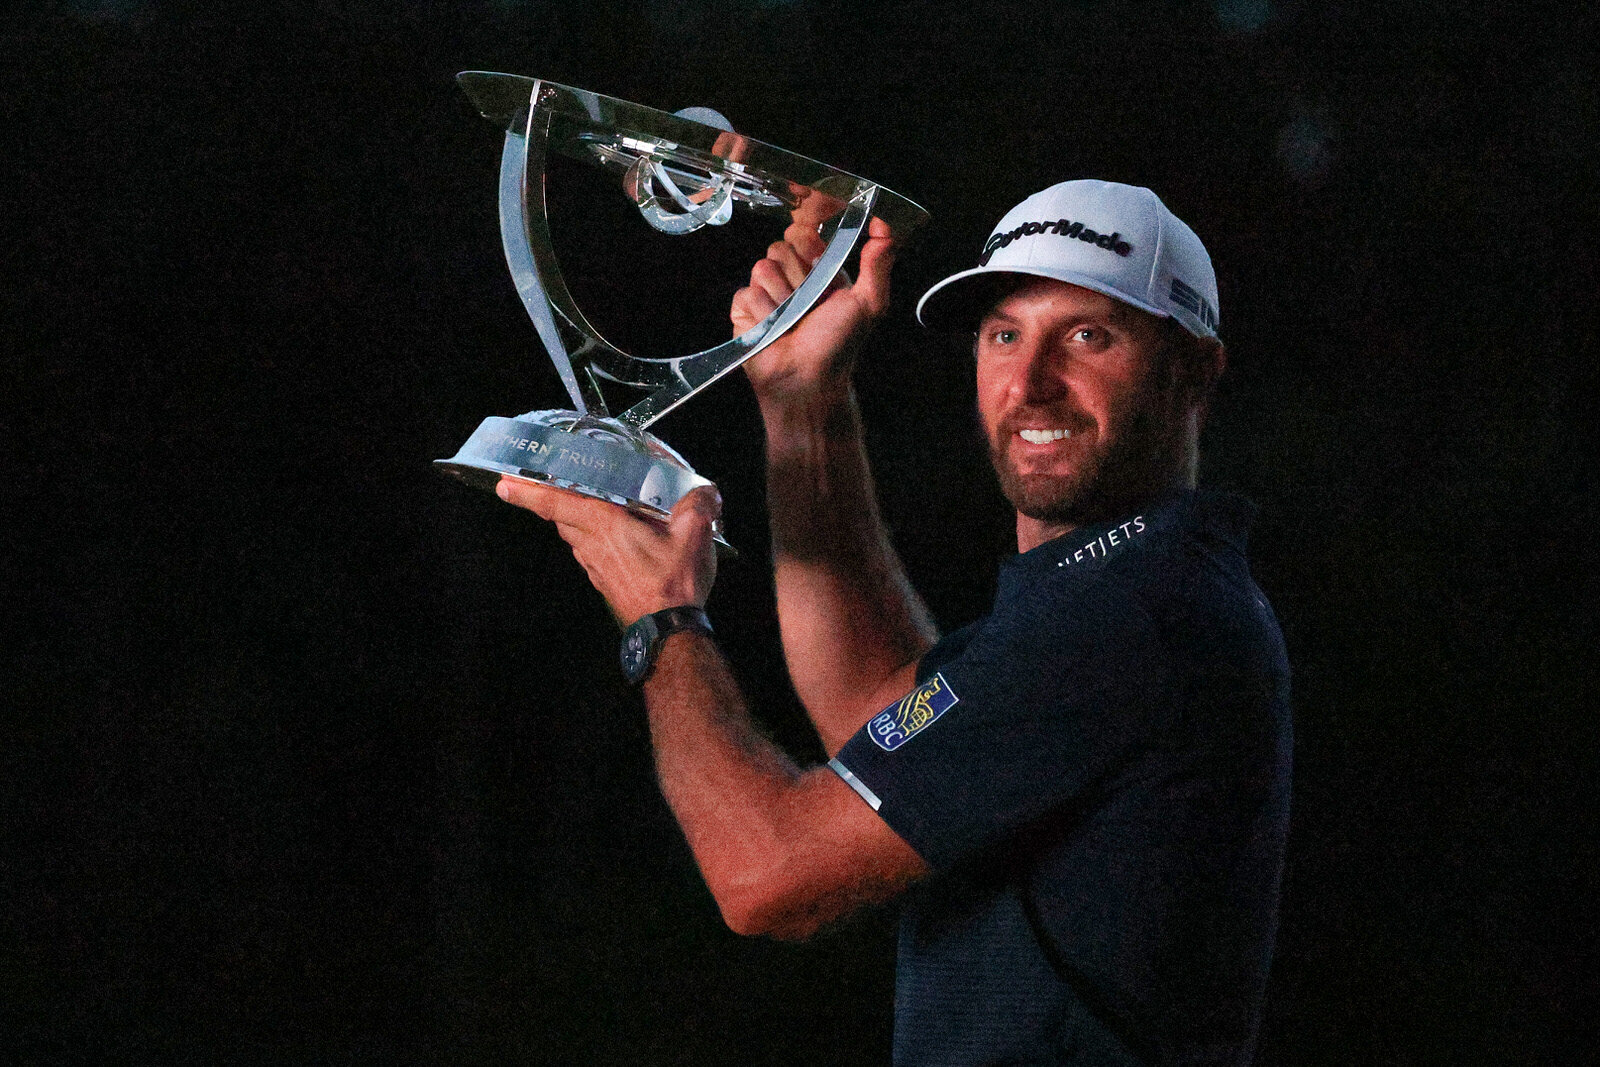  NORTON, MASSACHUSETTS - AUGUST 23: Dustin Johnson of the United States celebrates with the trophy after going 30-under par to win during the final round of The Northern Trust at TPC Boston on August 23, 2020 in Norton, Massachusetts. (Photo by Maddi